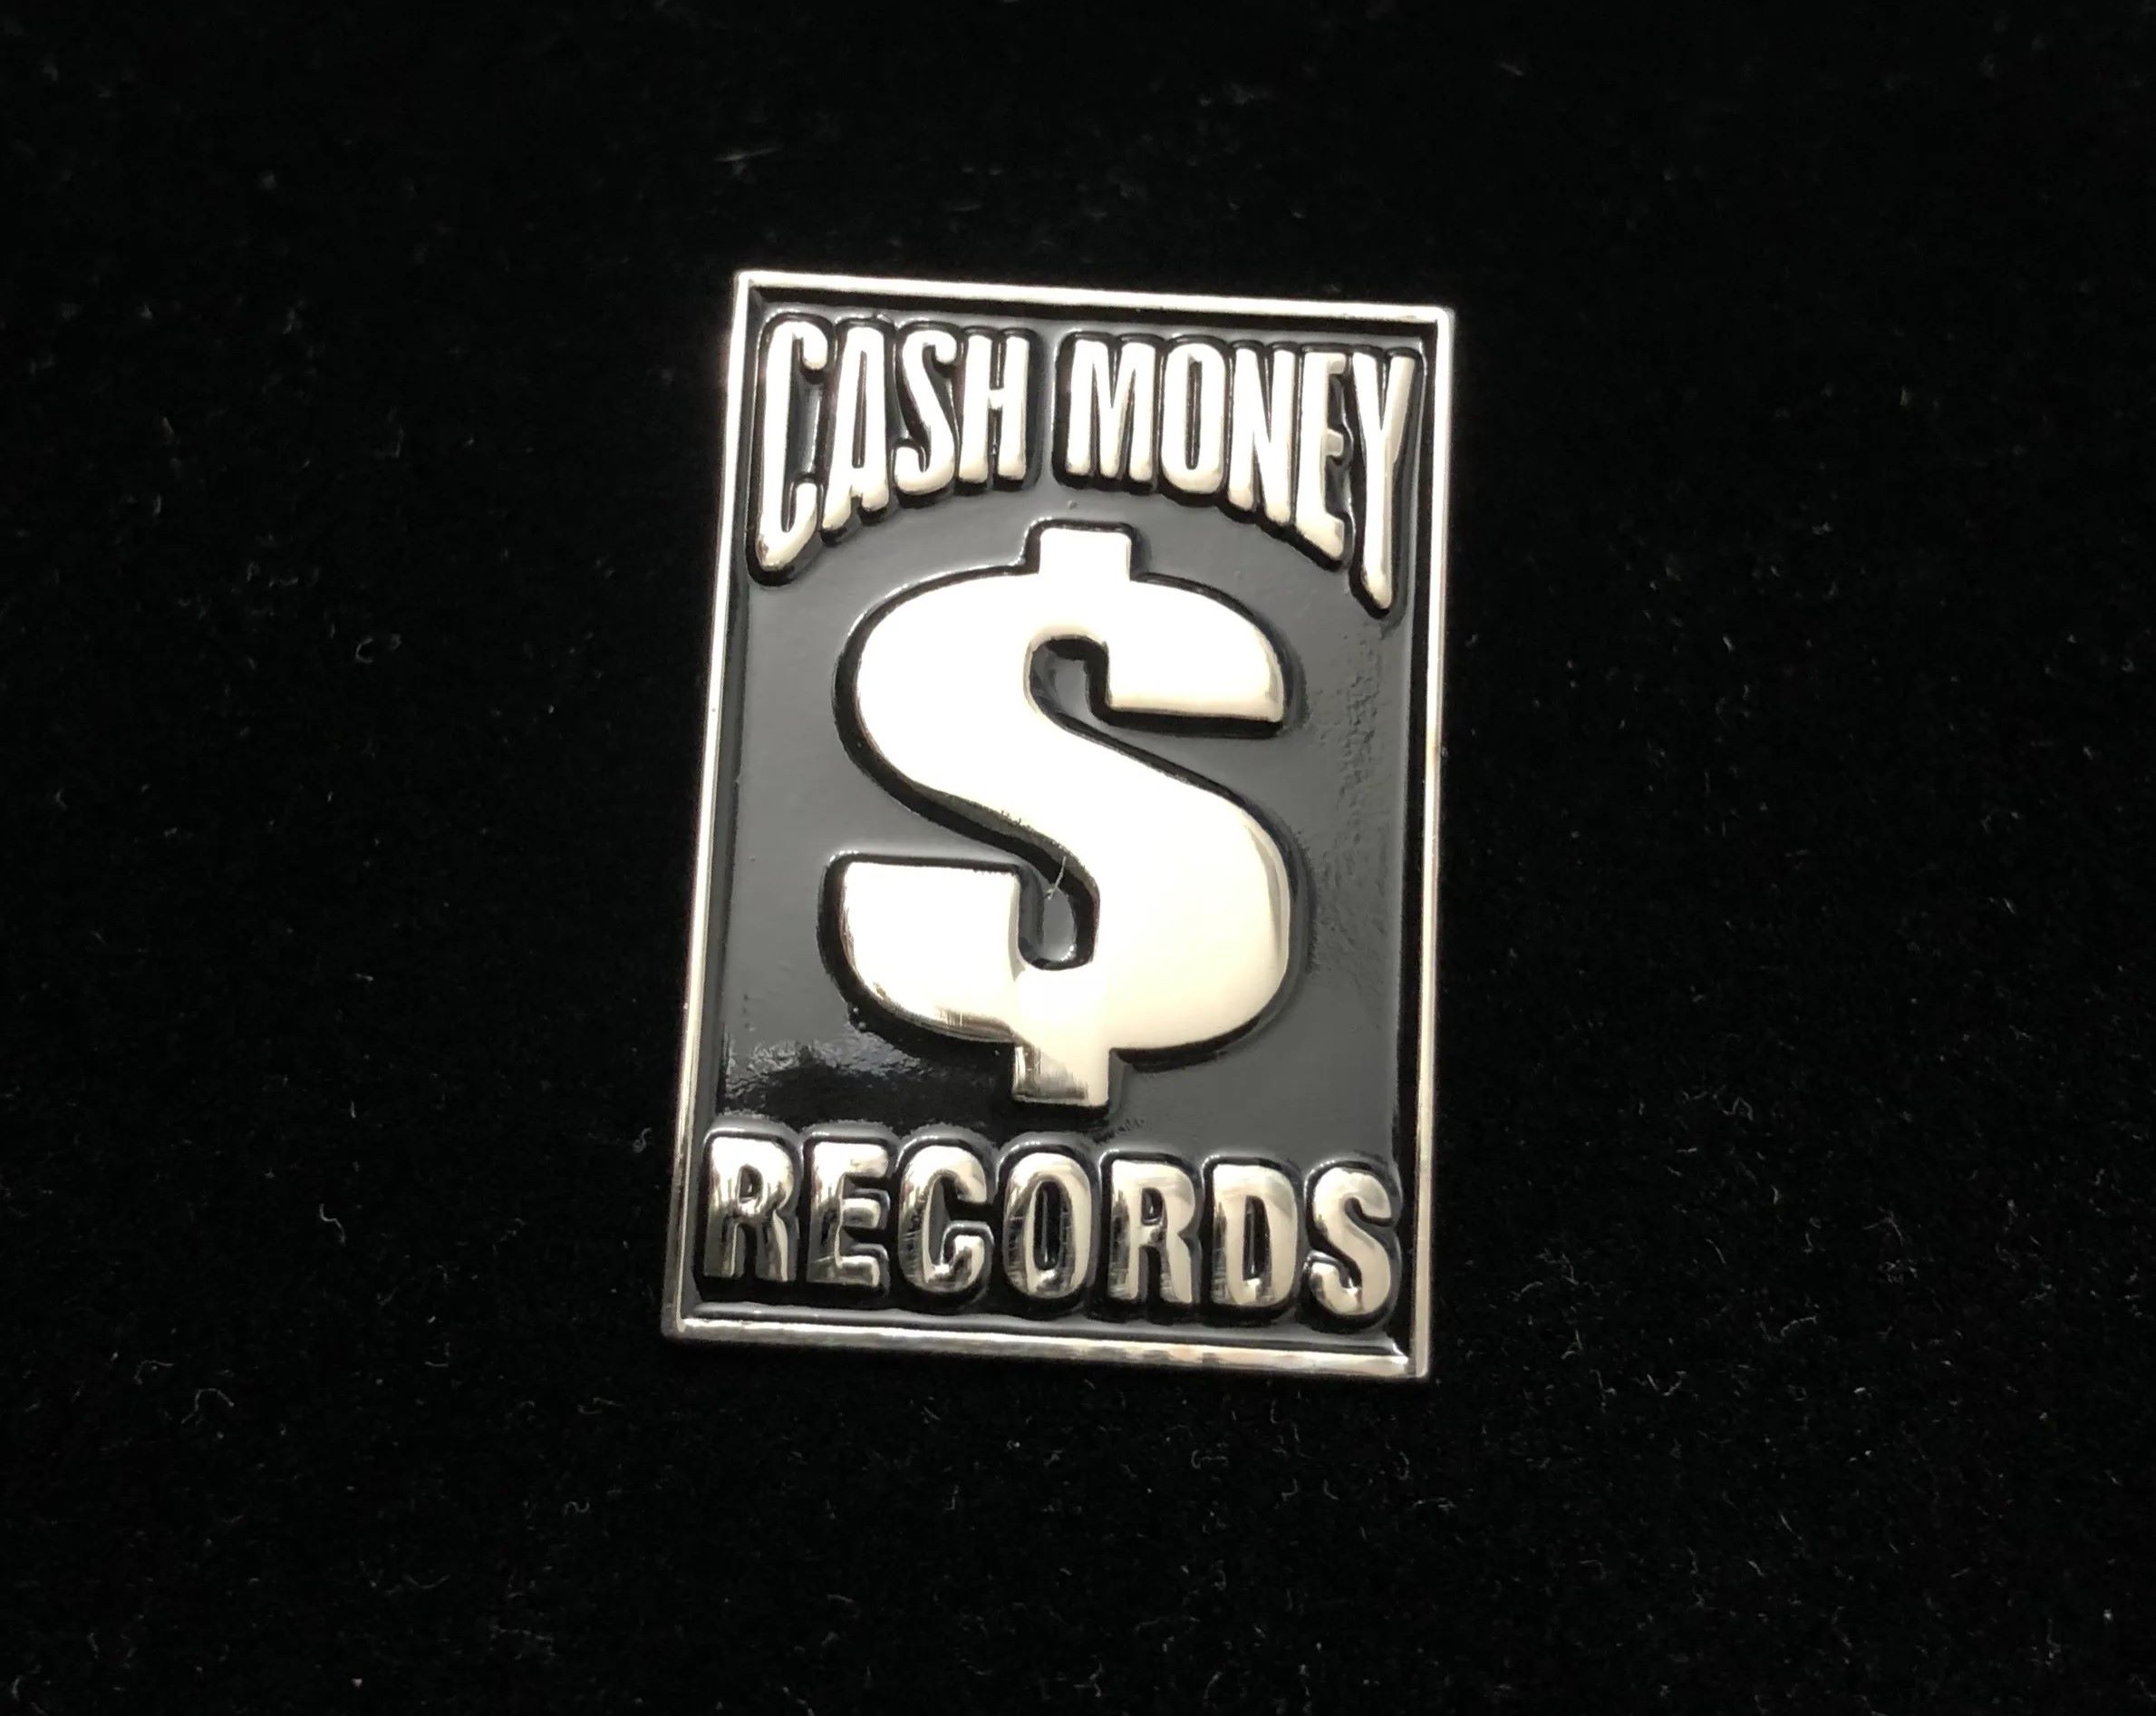 Who Was The First Platinum Artist To Go Platinum With Cash Money Record Label